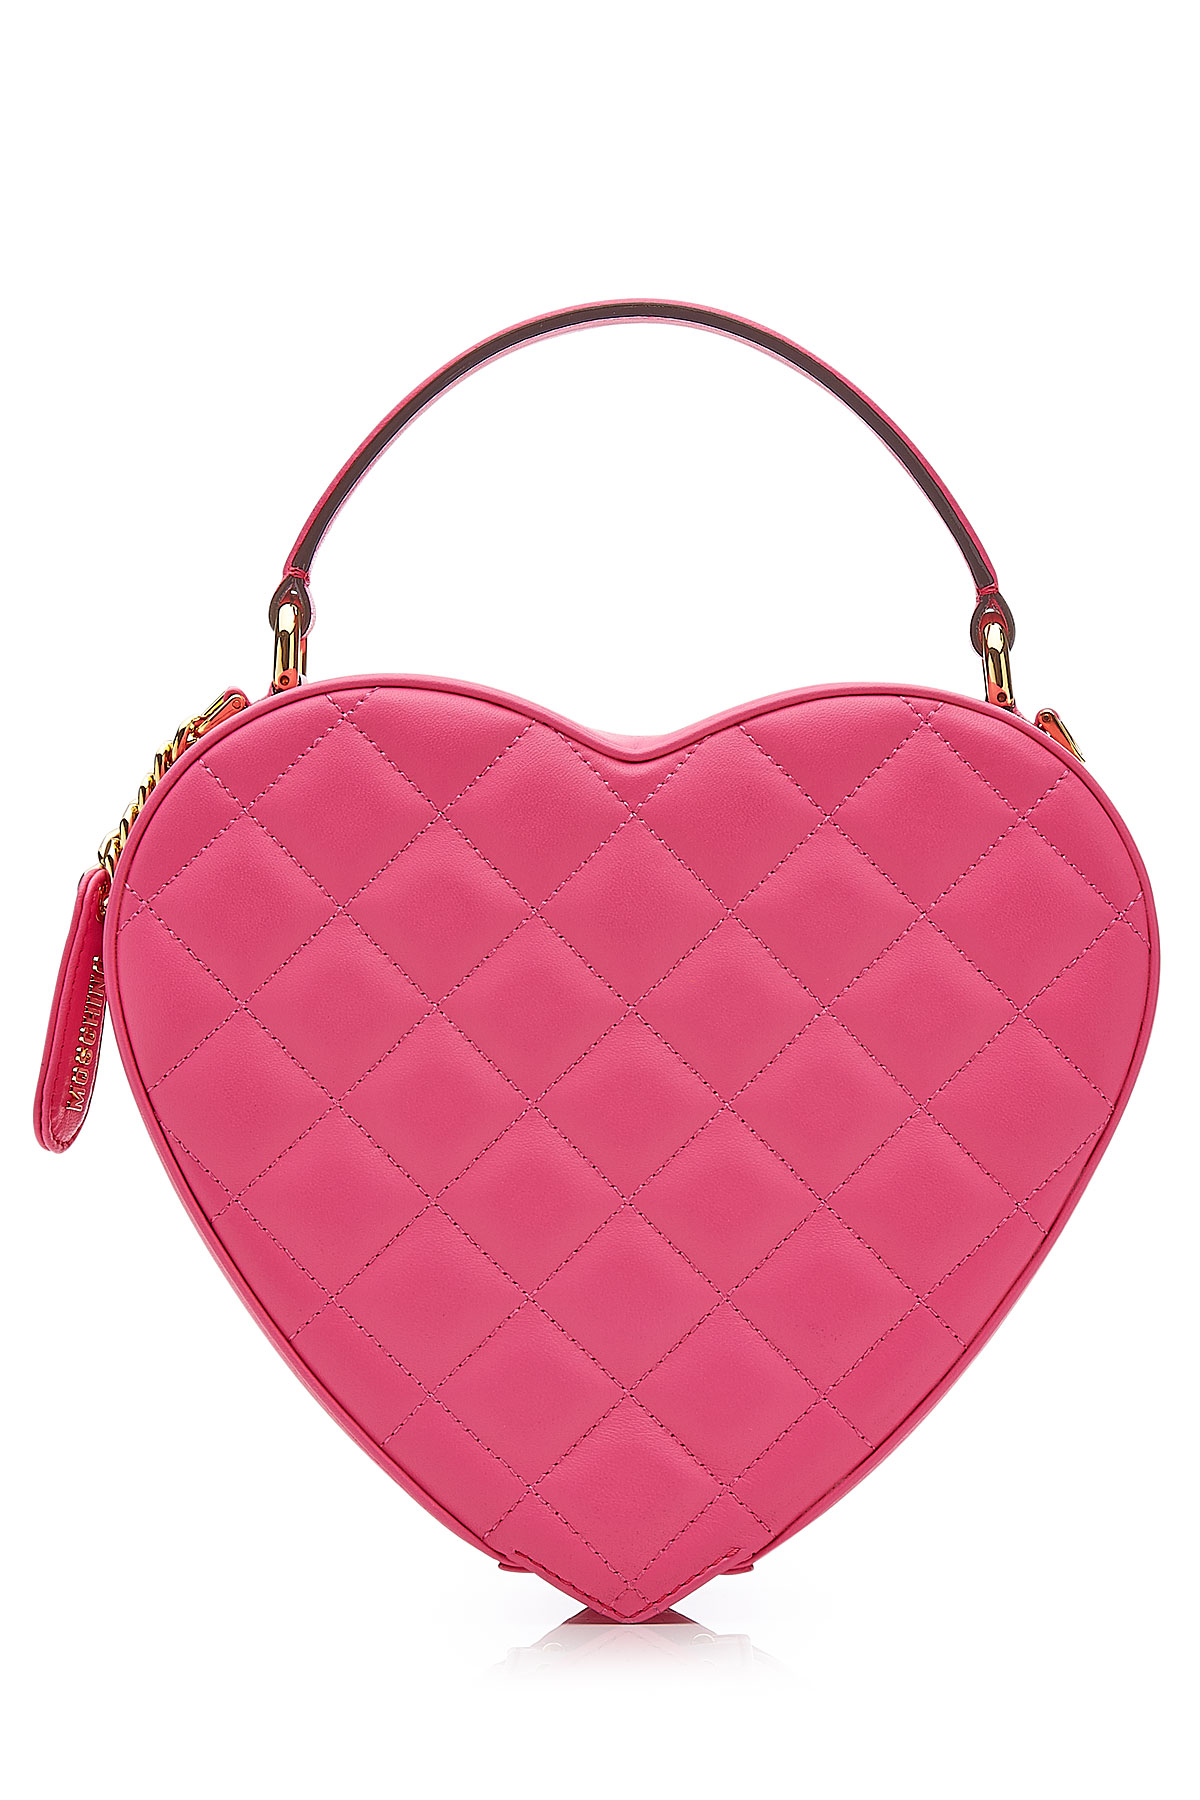 Moschino Crystal Heart Leather Shoulder Bag - Pink in Pink | Lyst